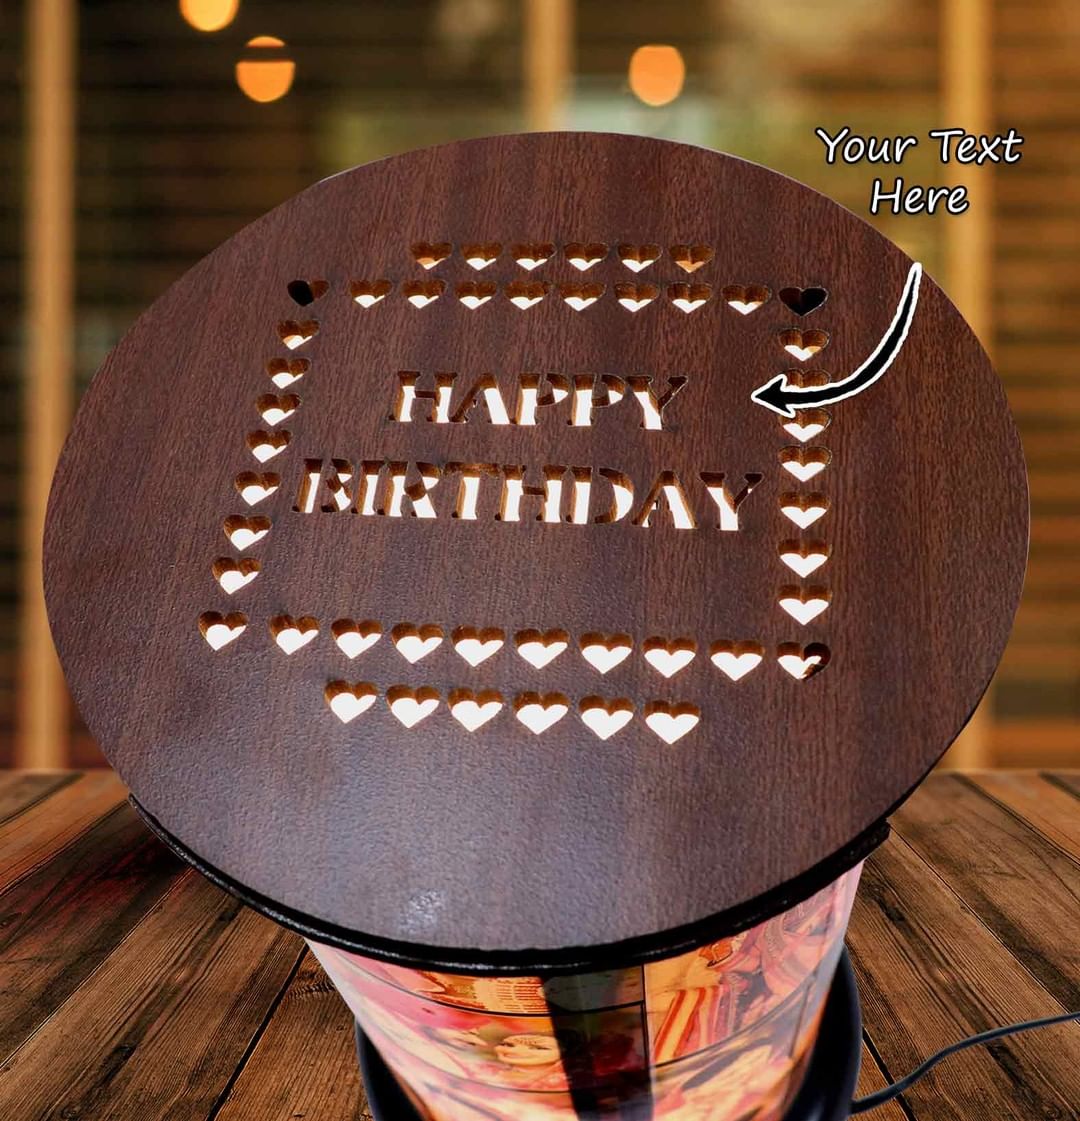 Buy Customized LED Table Lamps with 5 Personalized Photo- Rotating Cube Gift  for Anniversary, Couple, Birthday, Wedding, Home & Bedroom Decorative -  Wooden Enclosure, Brown Online at Low Prices in India - Amazon.in